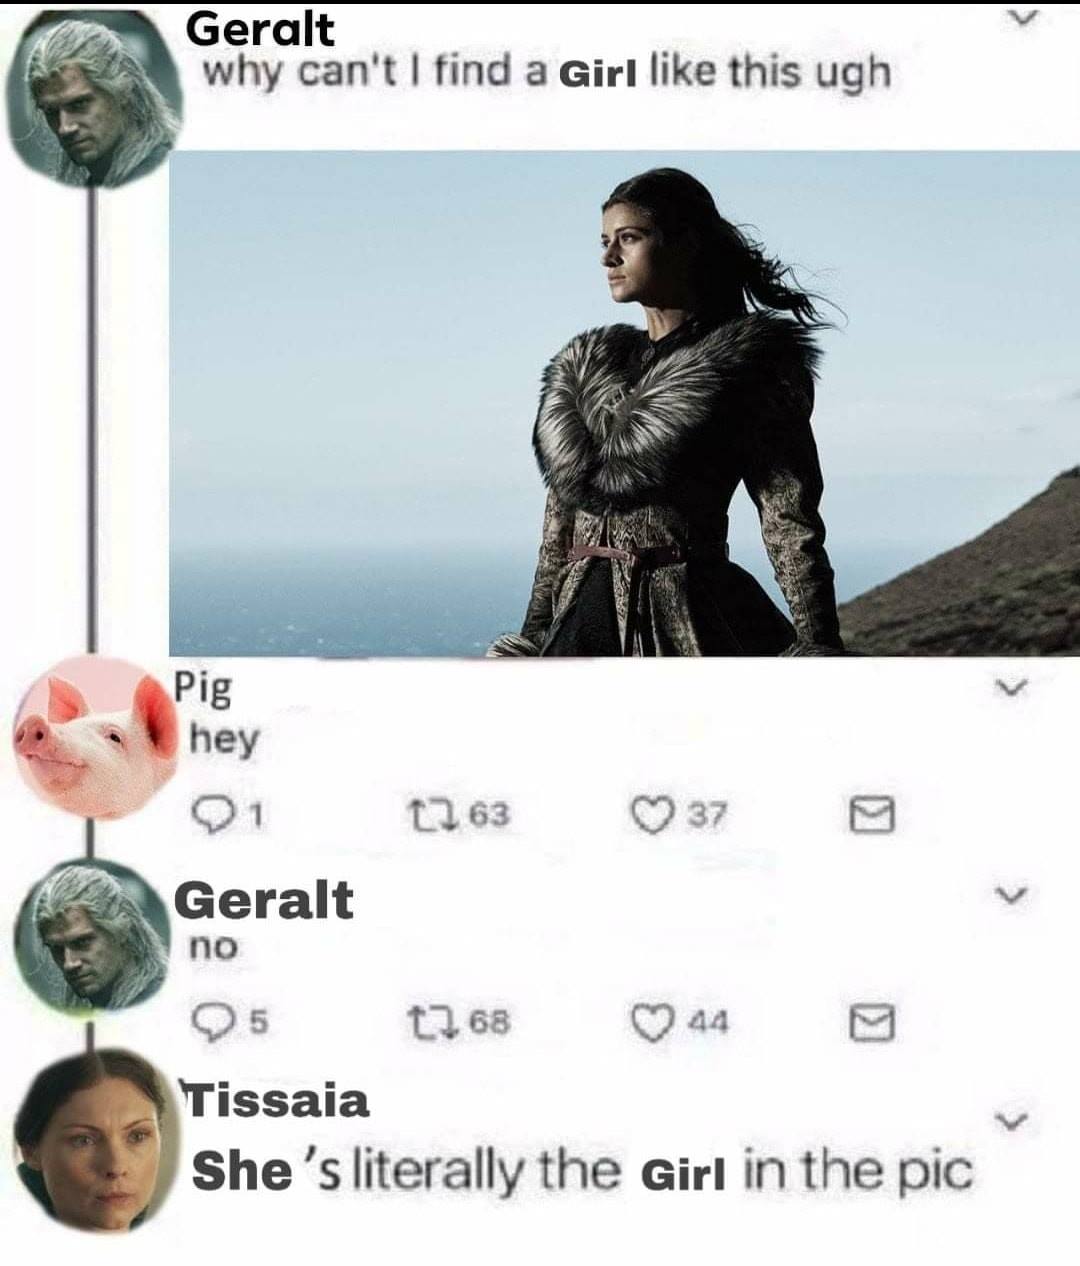 Witcher memes - witcher memes yennefer - Geralt why can't I find a Girl this ugh Pig hey 01 Geralt 016337 Geralt no 05 768 440 Tissaia She's literally the Girl in the pic